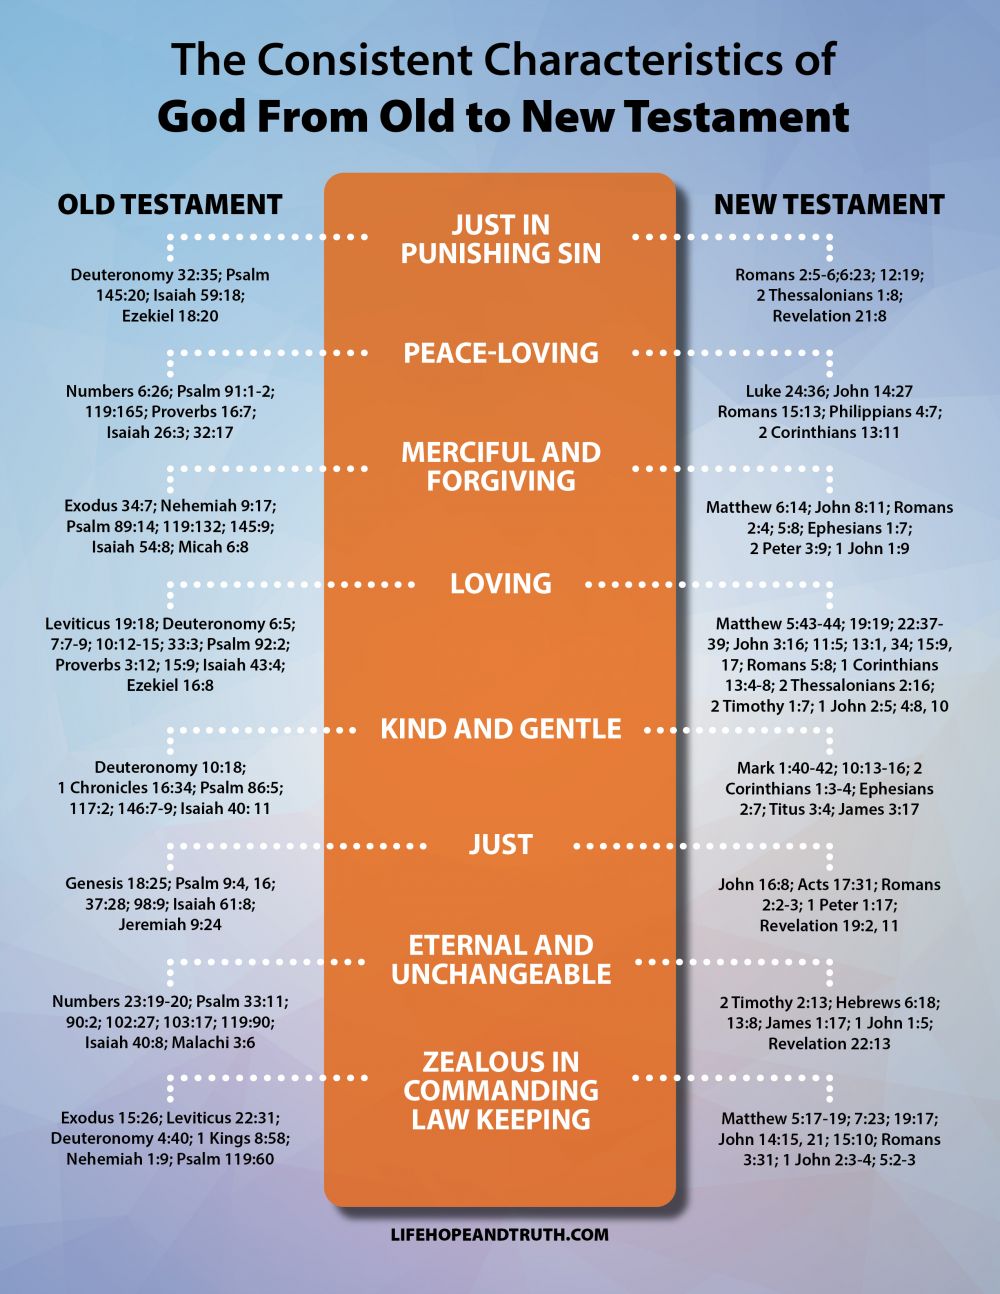 Characteristics of God From Old to New Testament